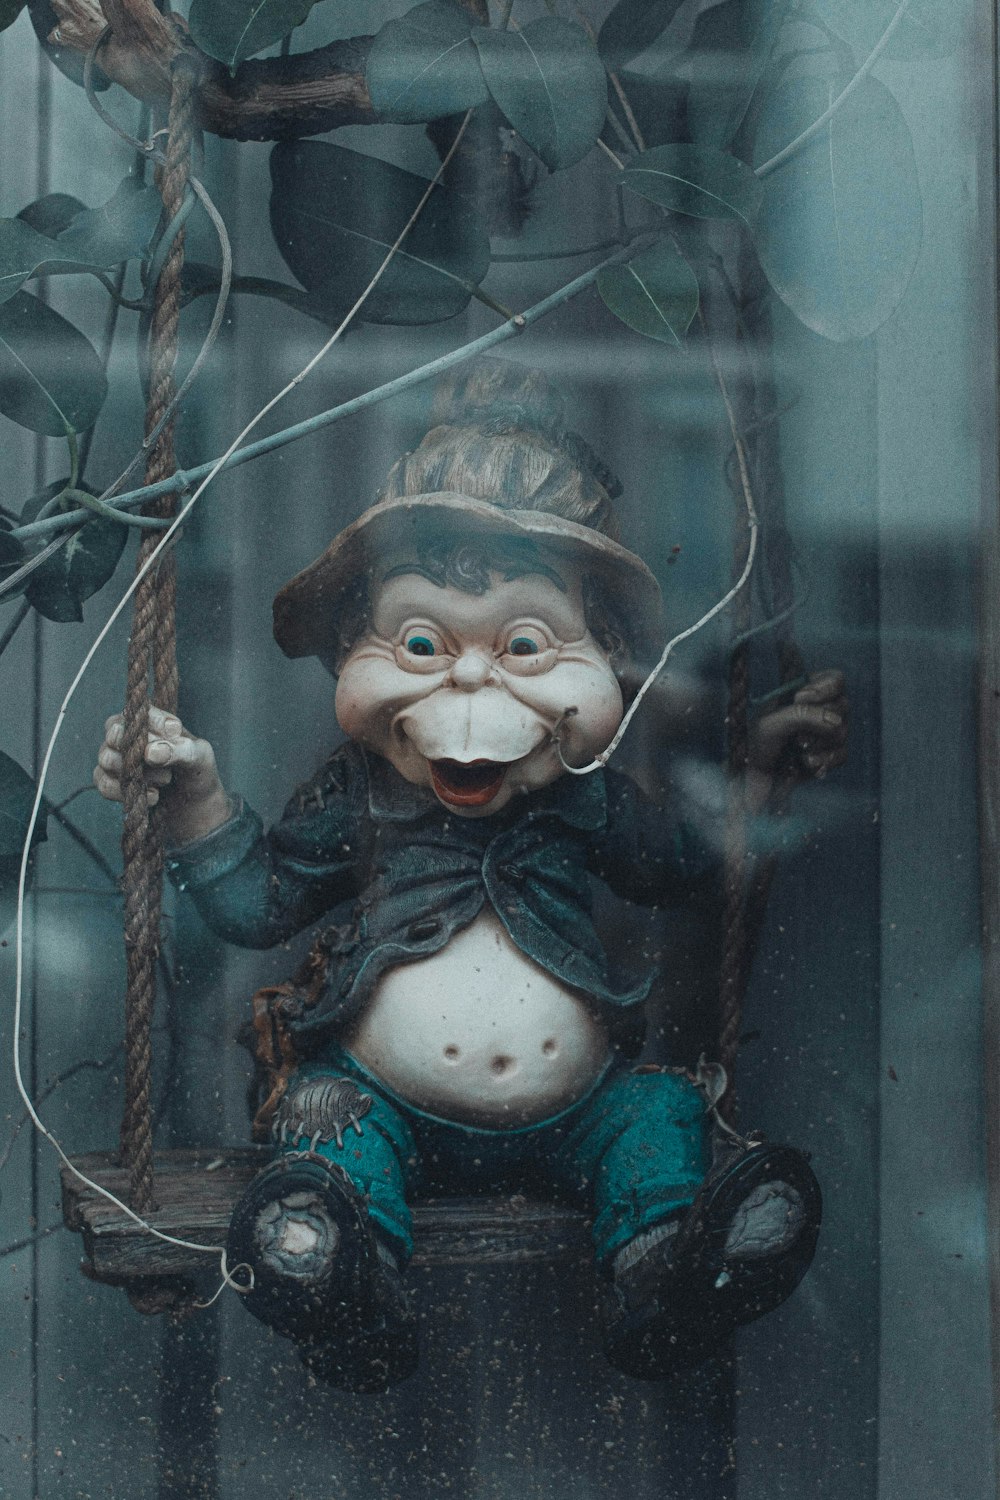 gray and brown monkey sitting on swing figurine